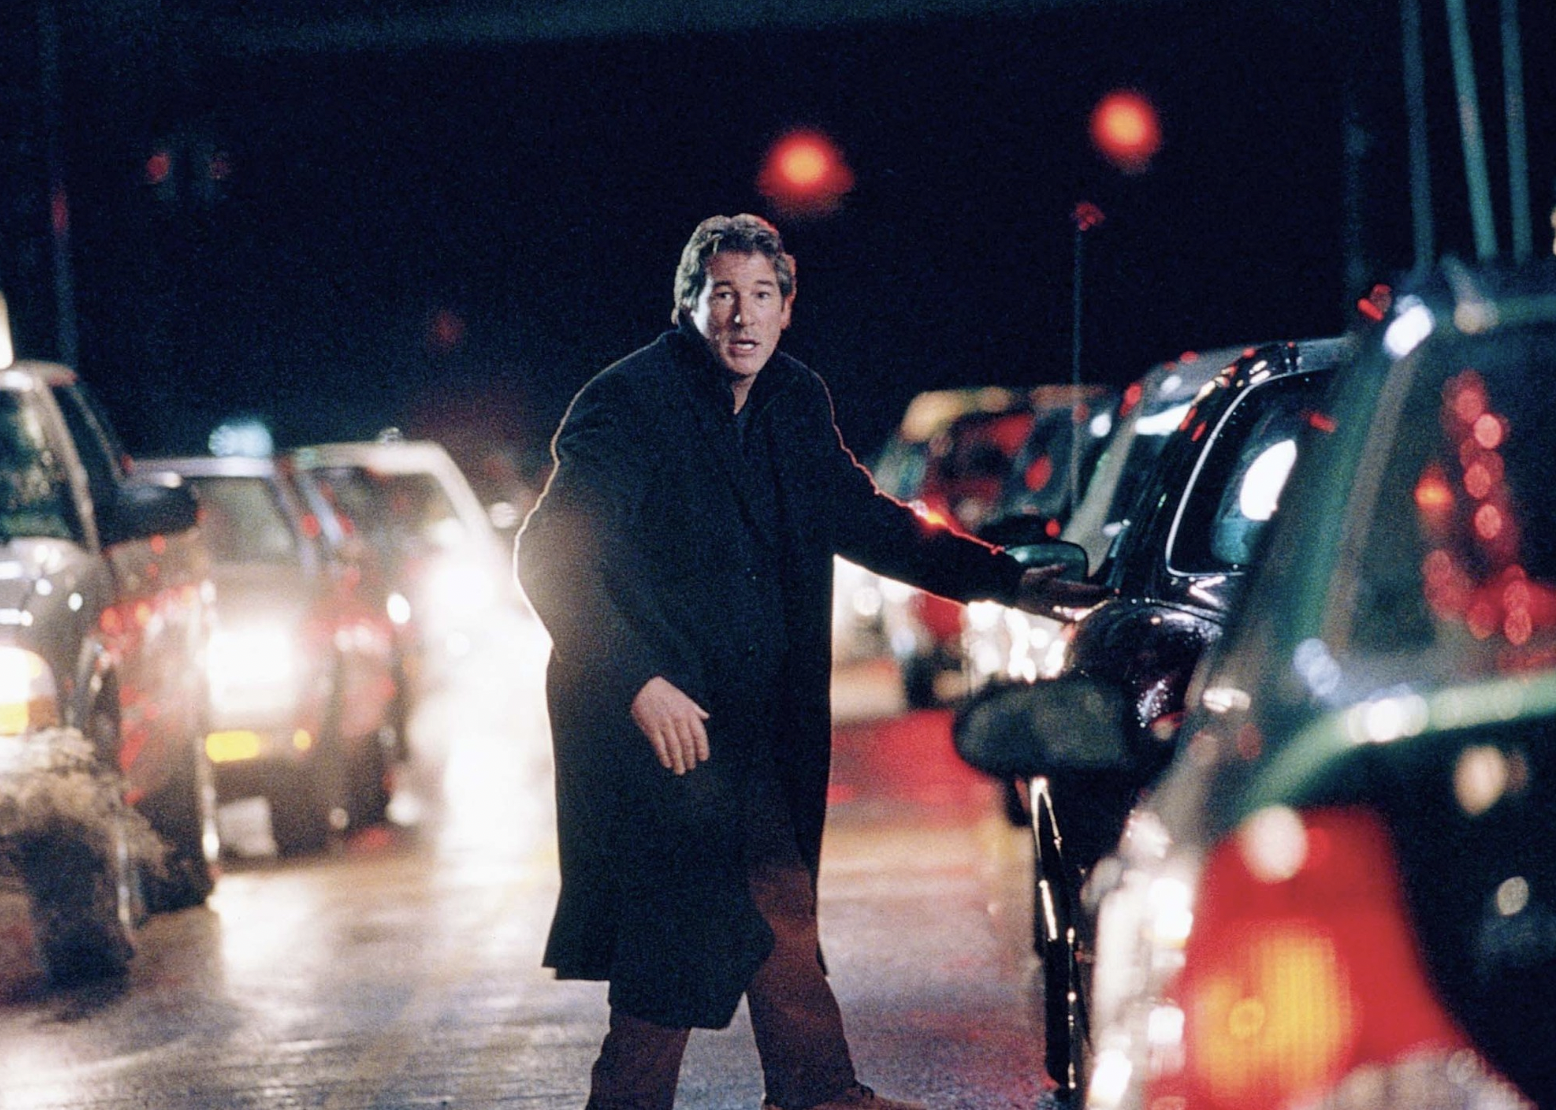 Richard Gere in a scene from "The Mothman Prophecies"